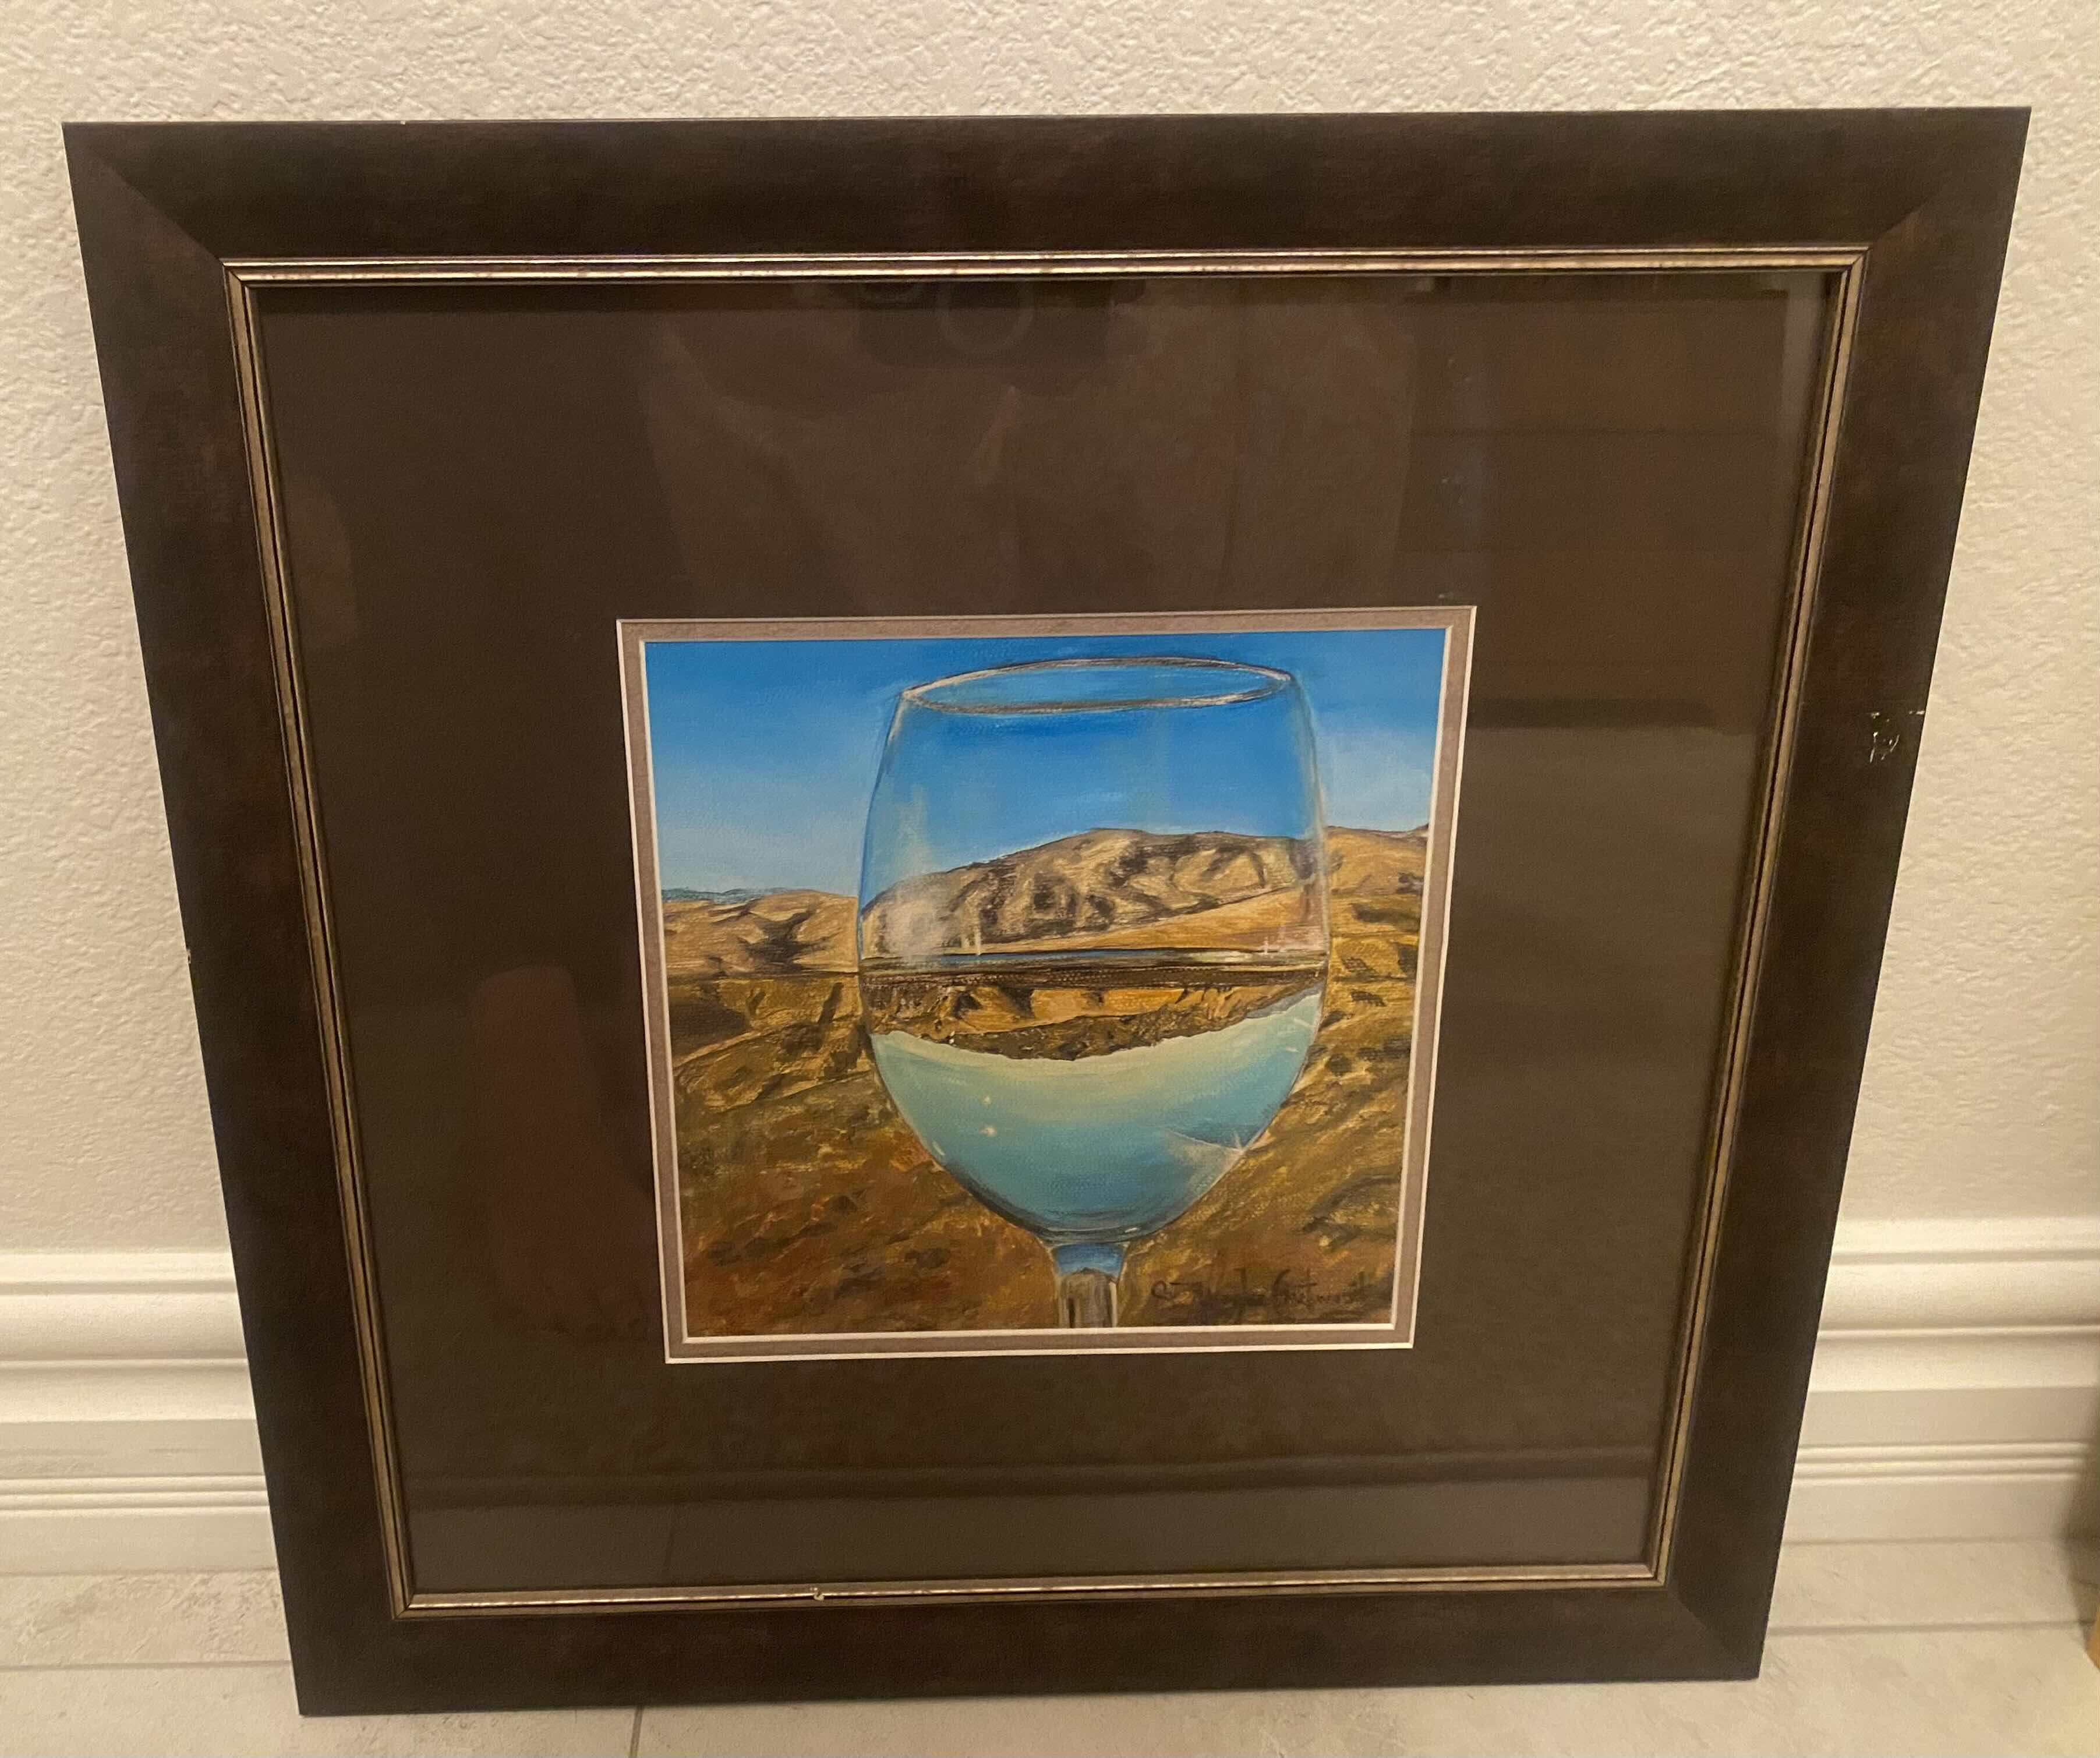 Photo 1 of CUSTOM WOOD FRAMED & MATTED IDAHO WATERCOLOR LANDSCAPE WITH WINE SIGNED BY ARTIST ARTWORK 21 1/2” x 21 1/2”